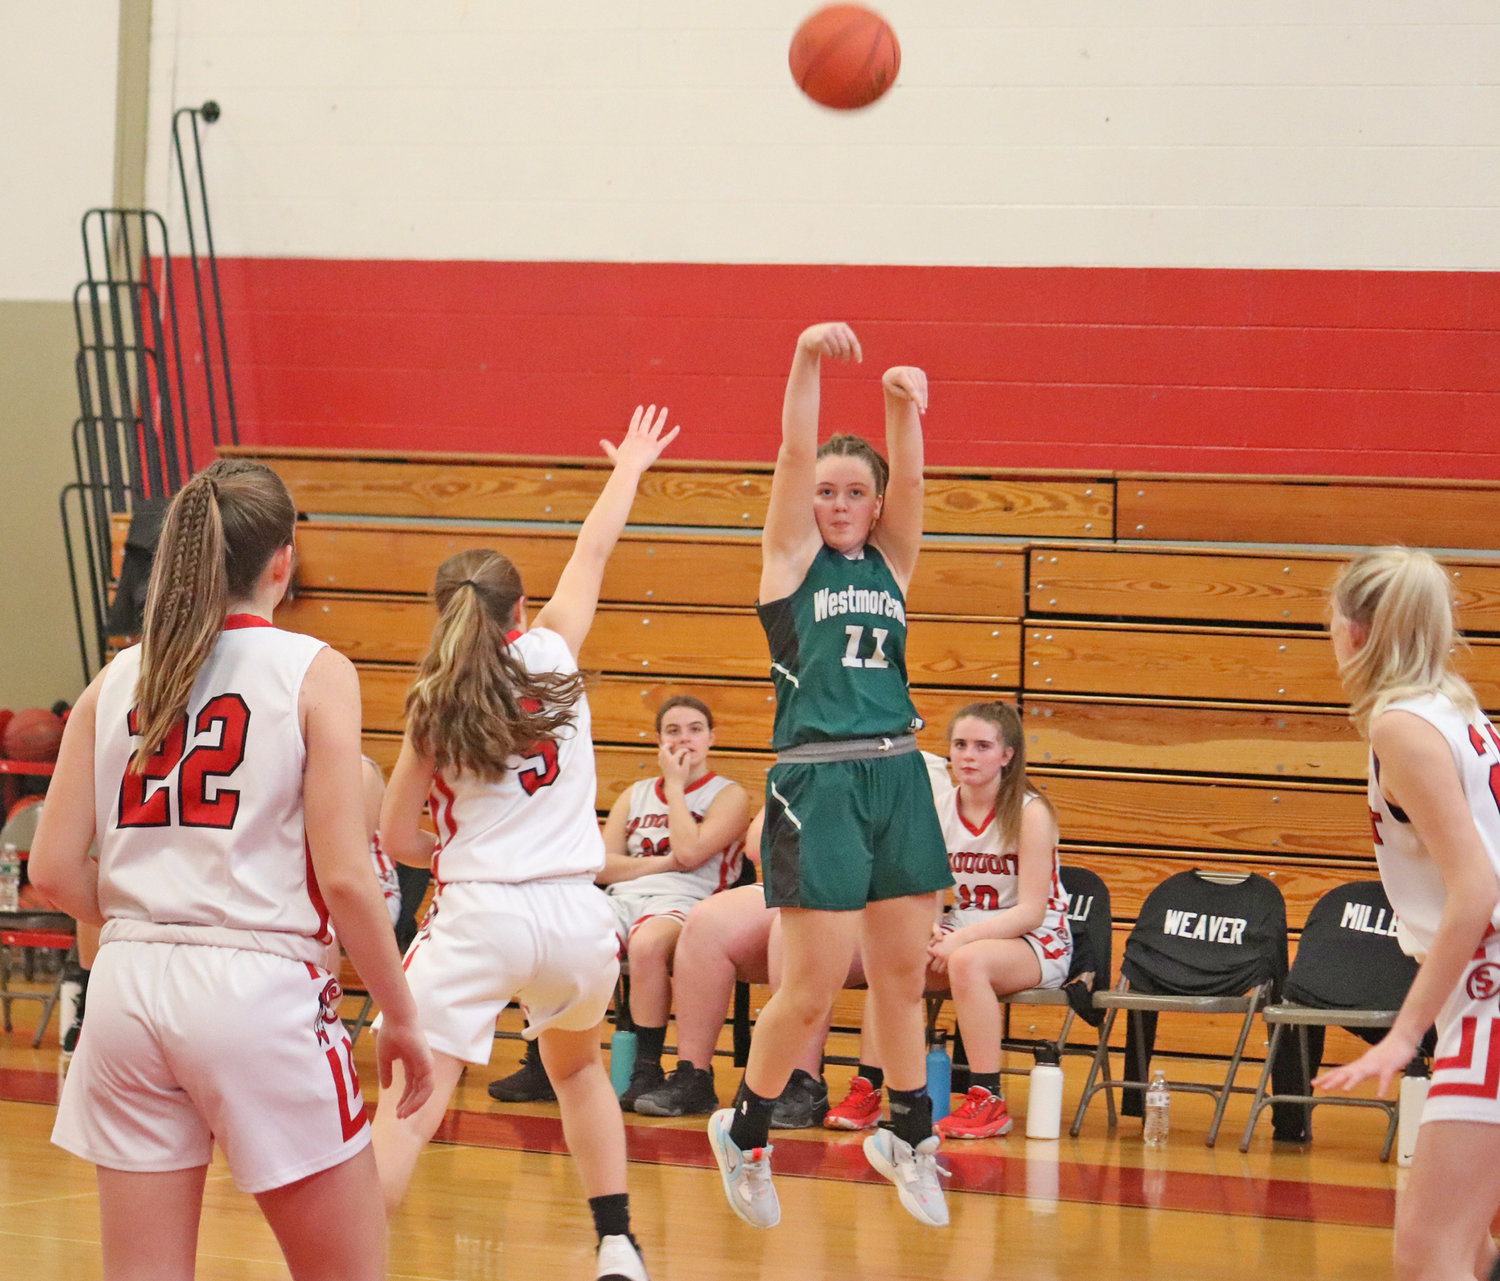 Westmoreland’s Julianna Otis launches a shot at Sauquoit Valley Saturday. The Bulldogs won 45-34.